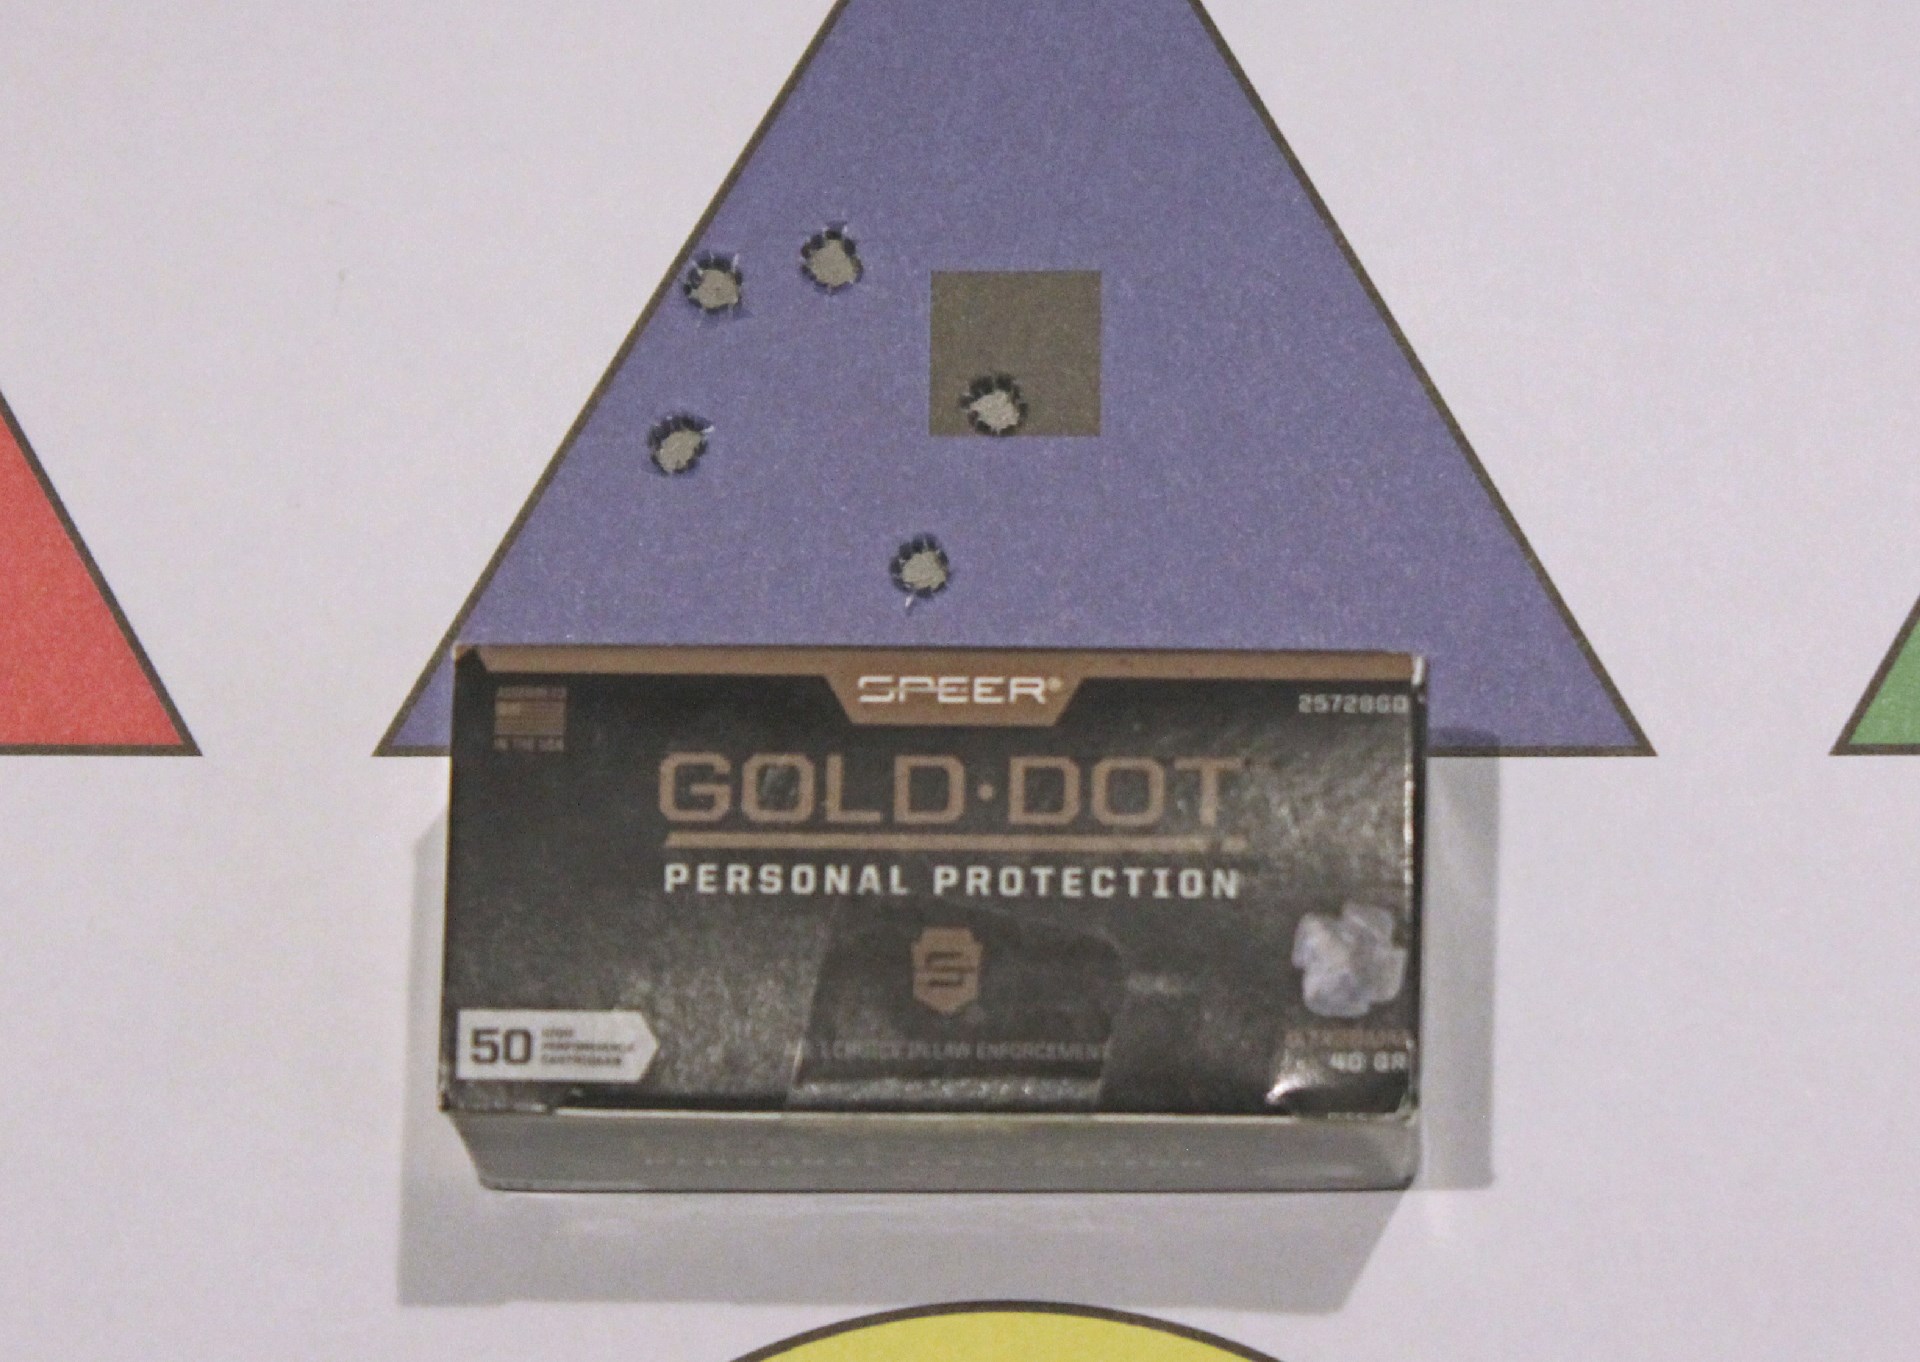 Speer Gold Dot ammunition box with target triangle bullet hole group accuracy testing